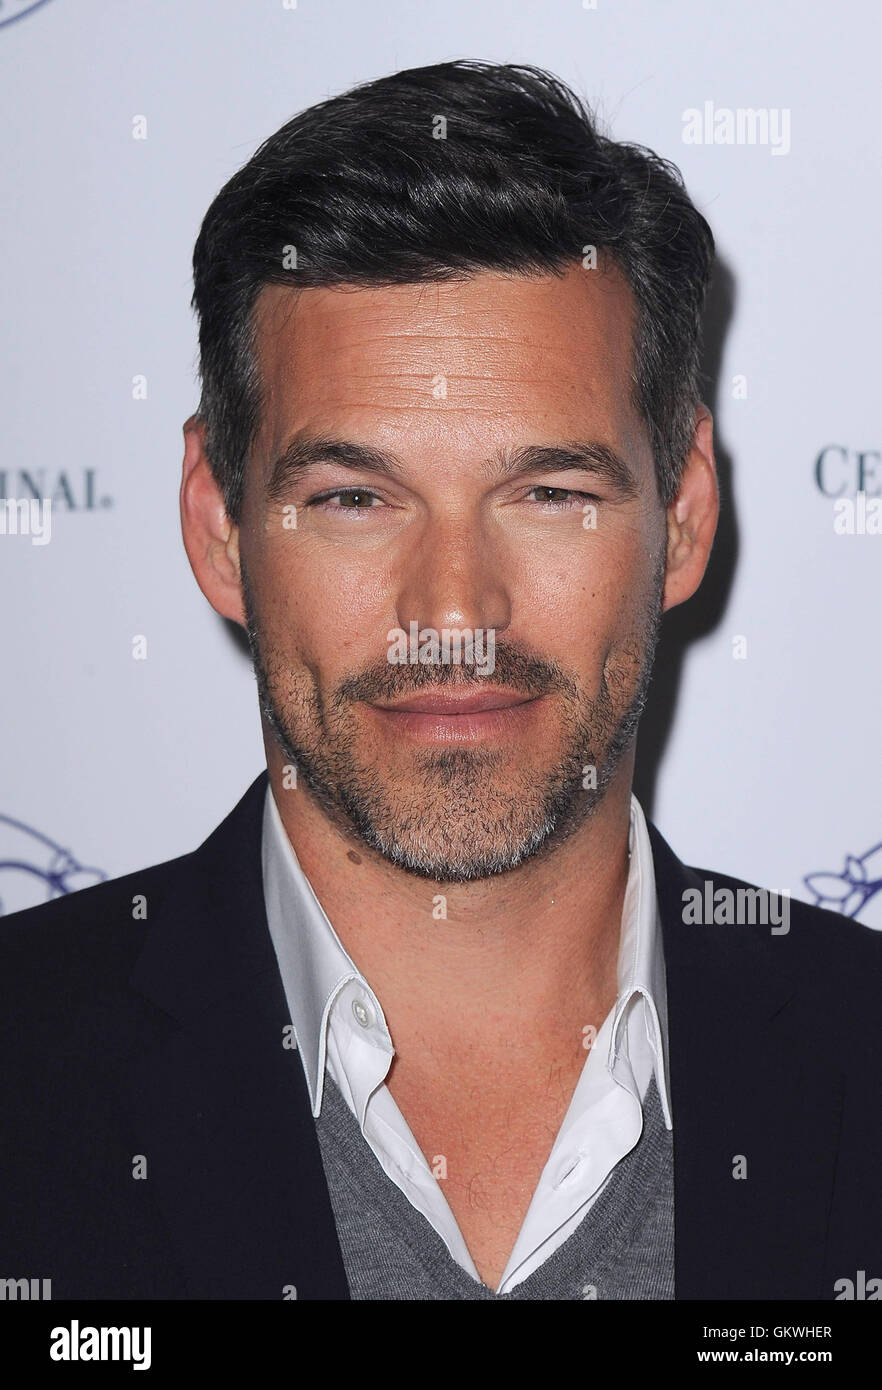 BEVERLY HILLS, CA - NOVEMBER 19:   Eddie Cibrian arrives at the Women's Guild Cedars-Sinai Annual Anniversary Gala at the Beverly Wilshire Hotel on November 19, 2012 in Beverly Hills, California. Credit: mpi99/MediaPunch Inc. Stock Photo